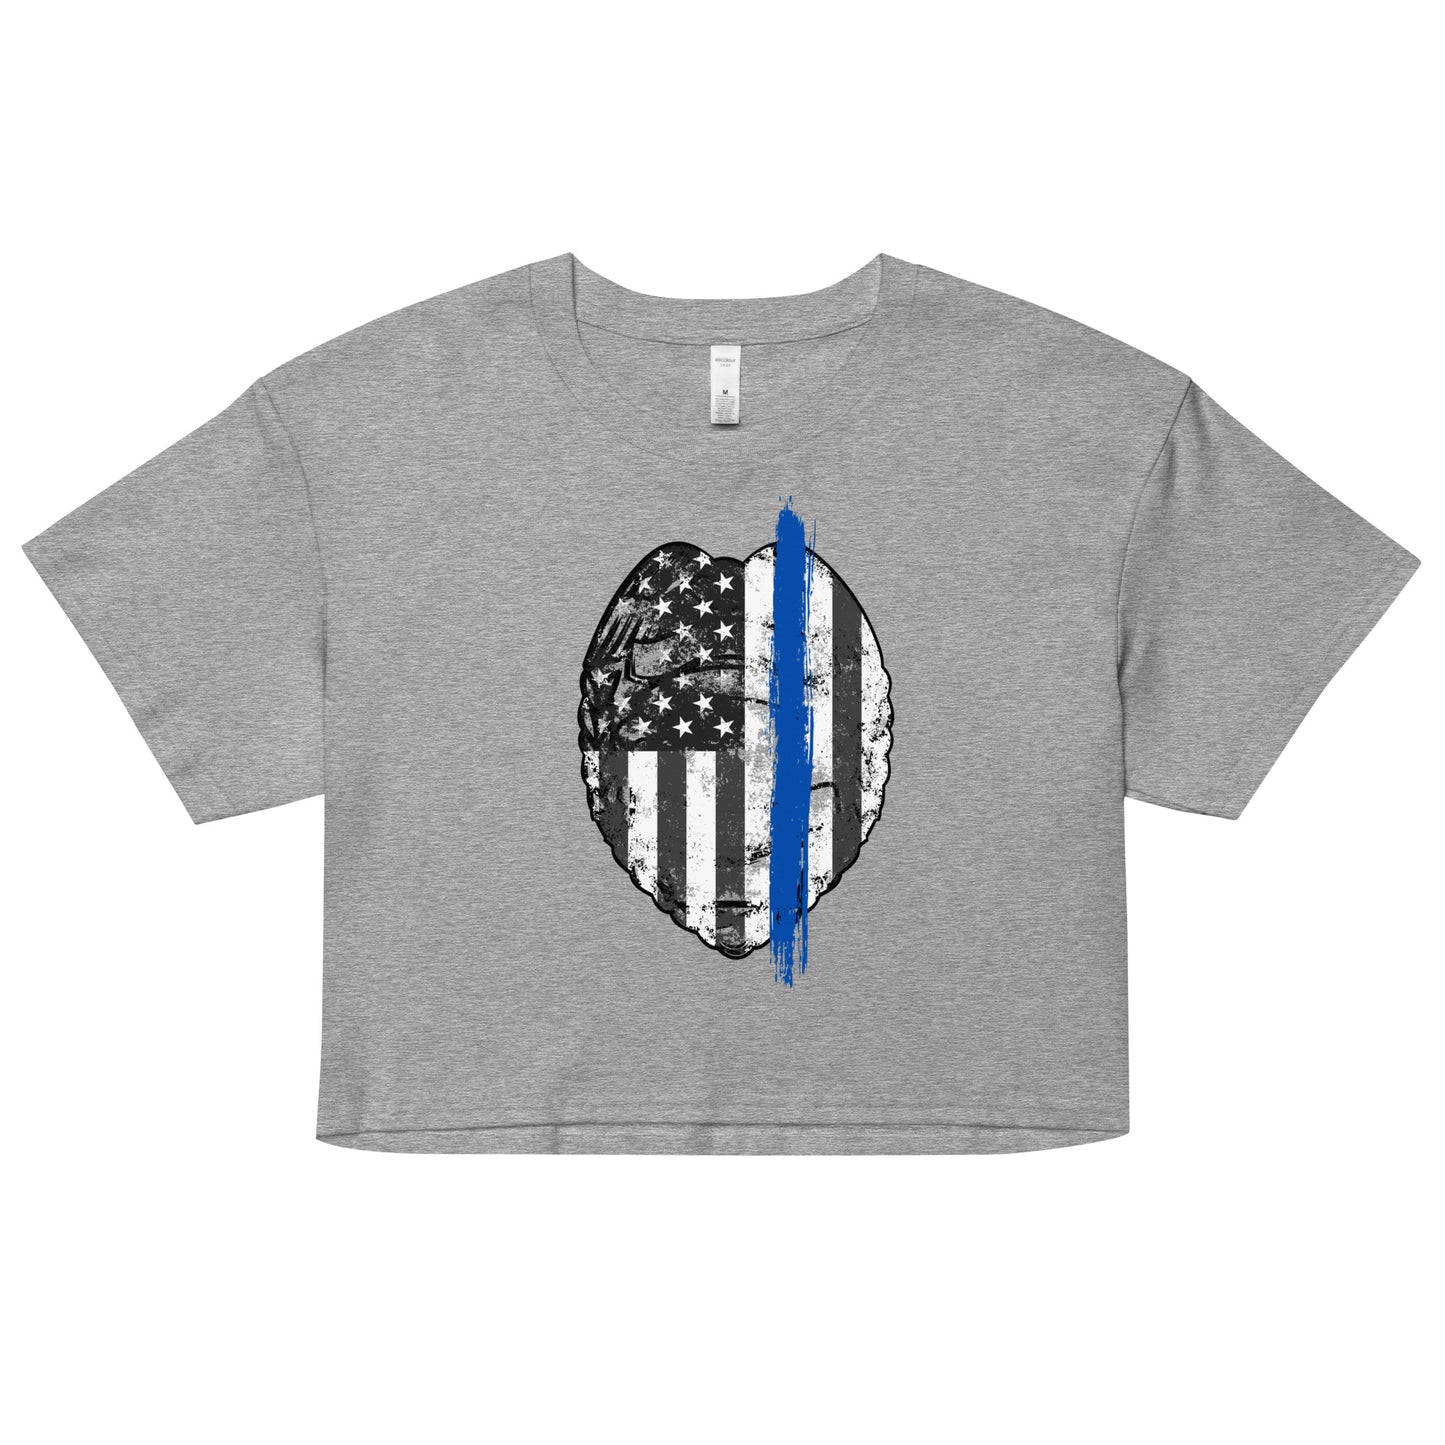 Back the Blue Women's Crop Top. Law Enforcement Thin Blue Line shirt in heather grey.